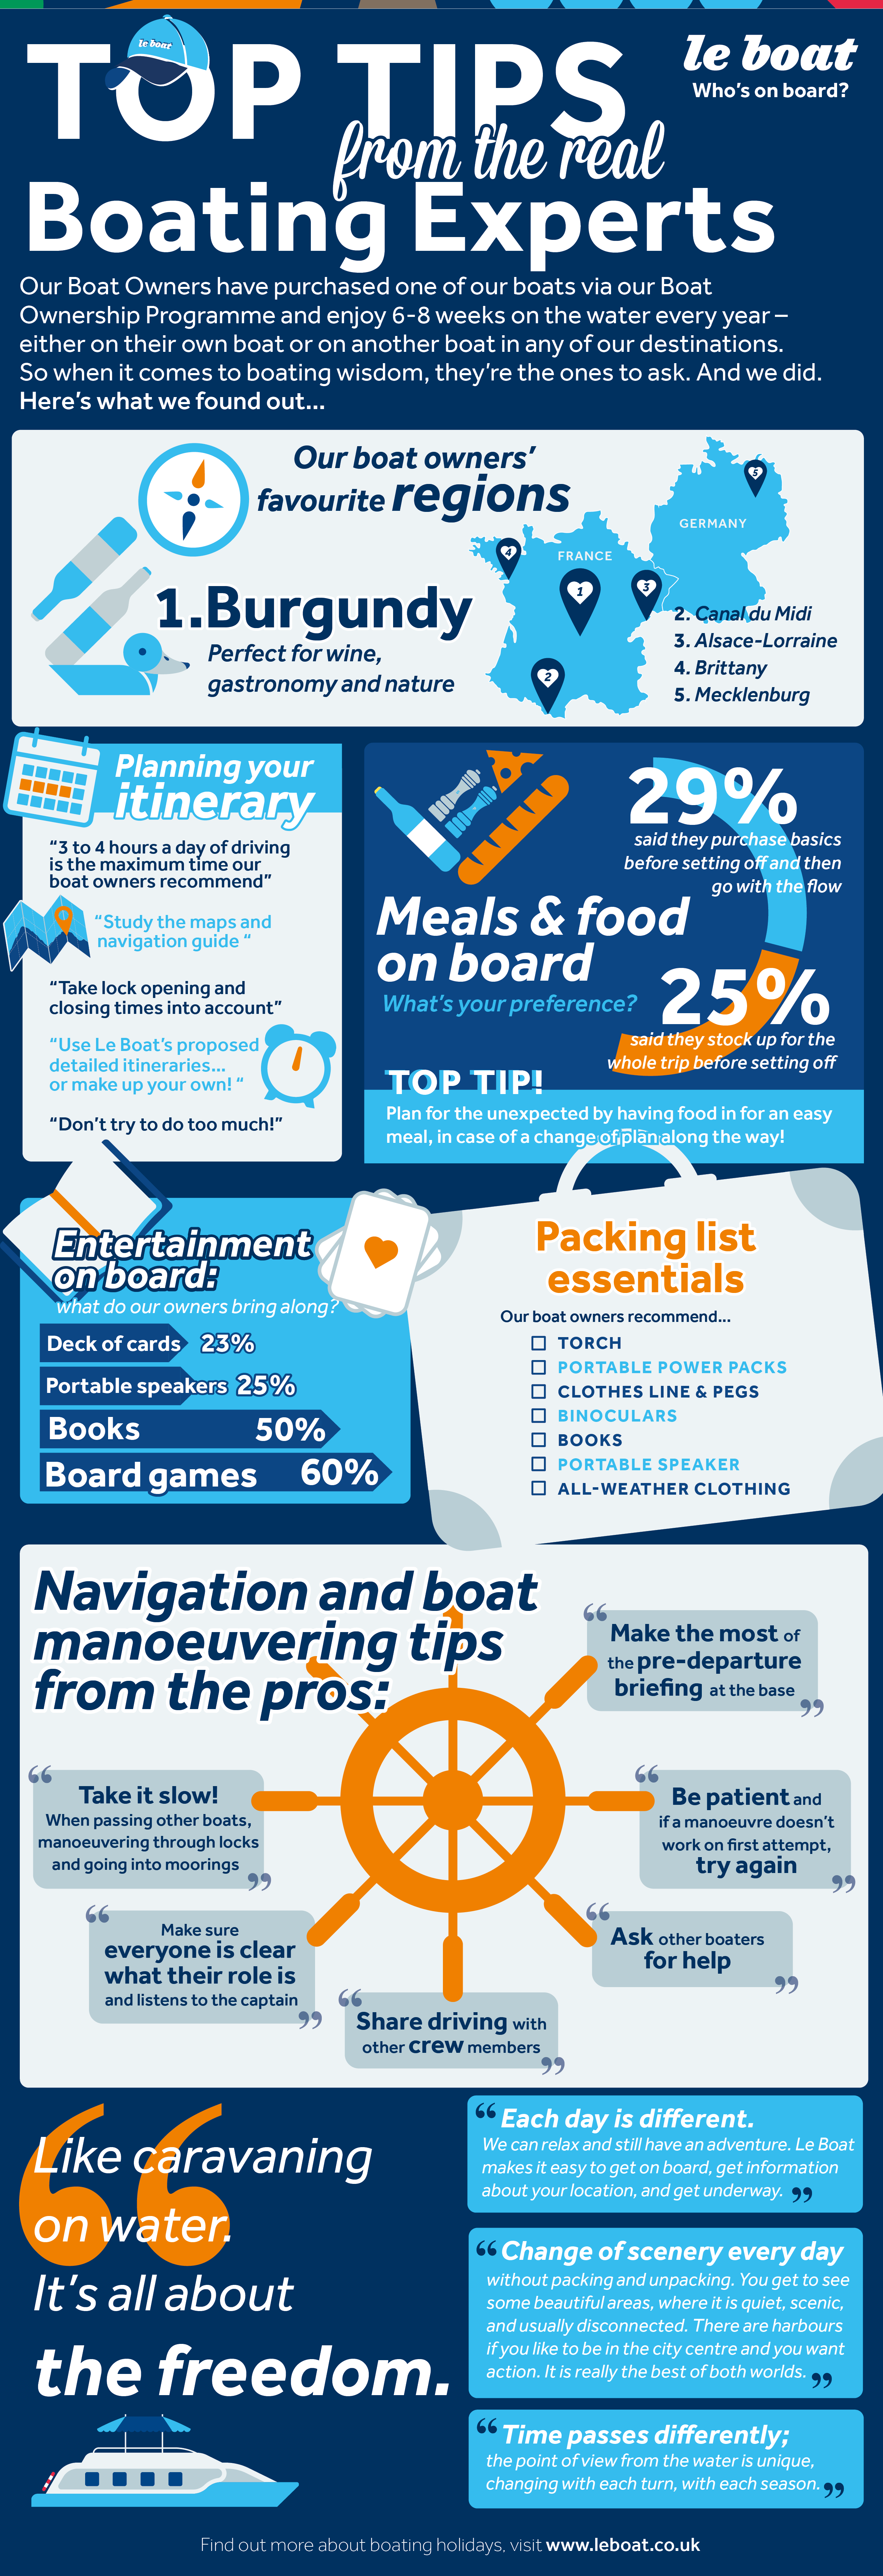 Le Boat's boat owner's top tips infographic